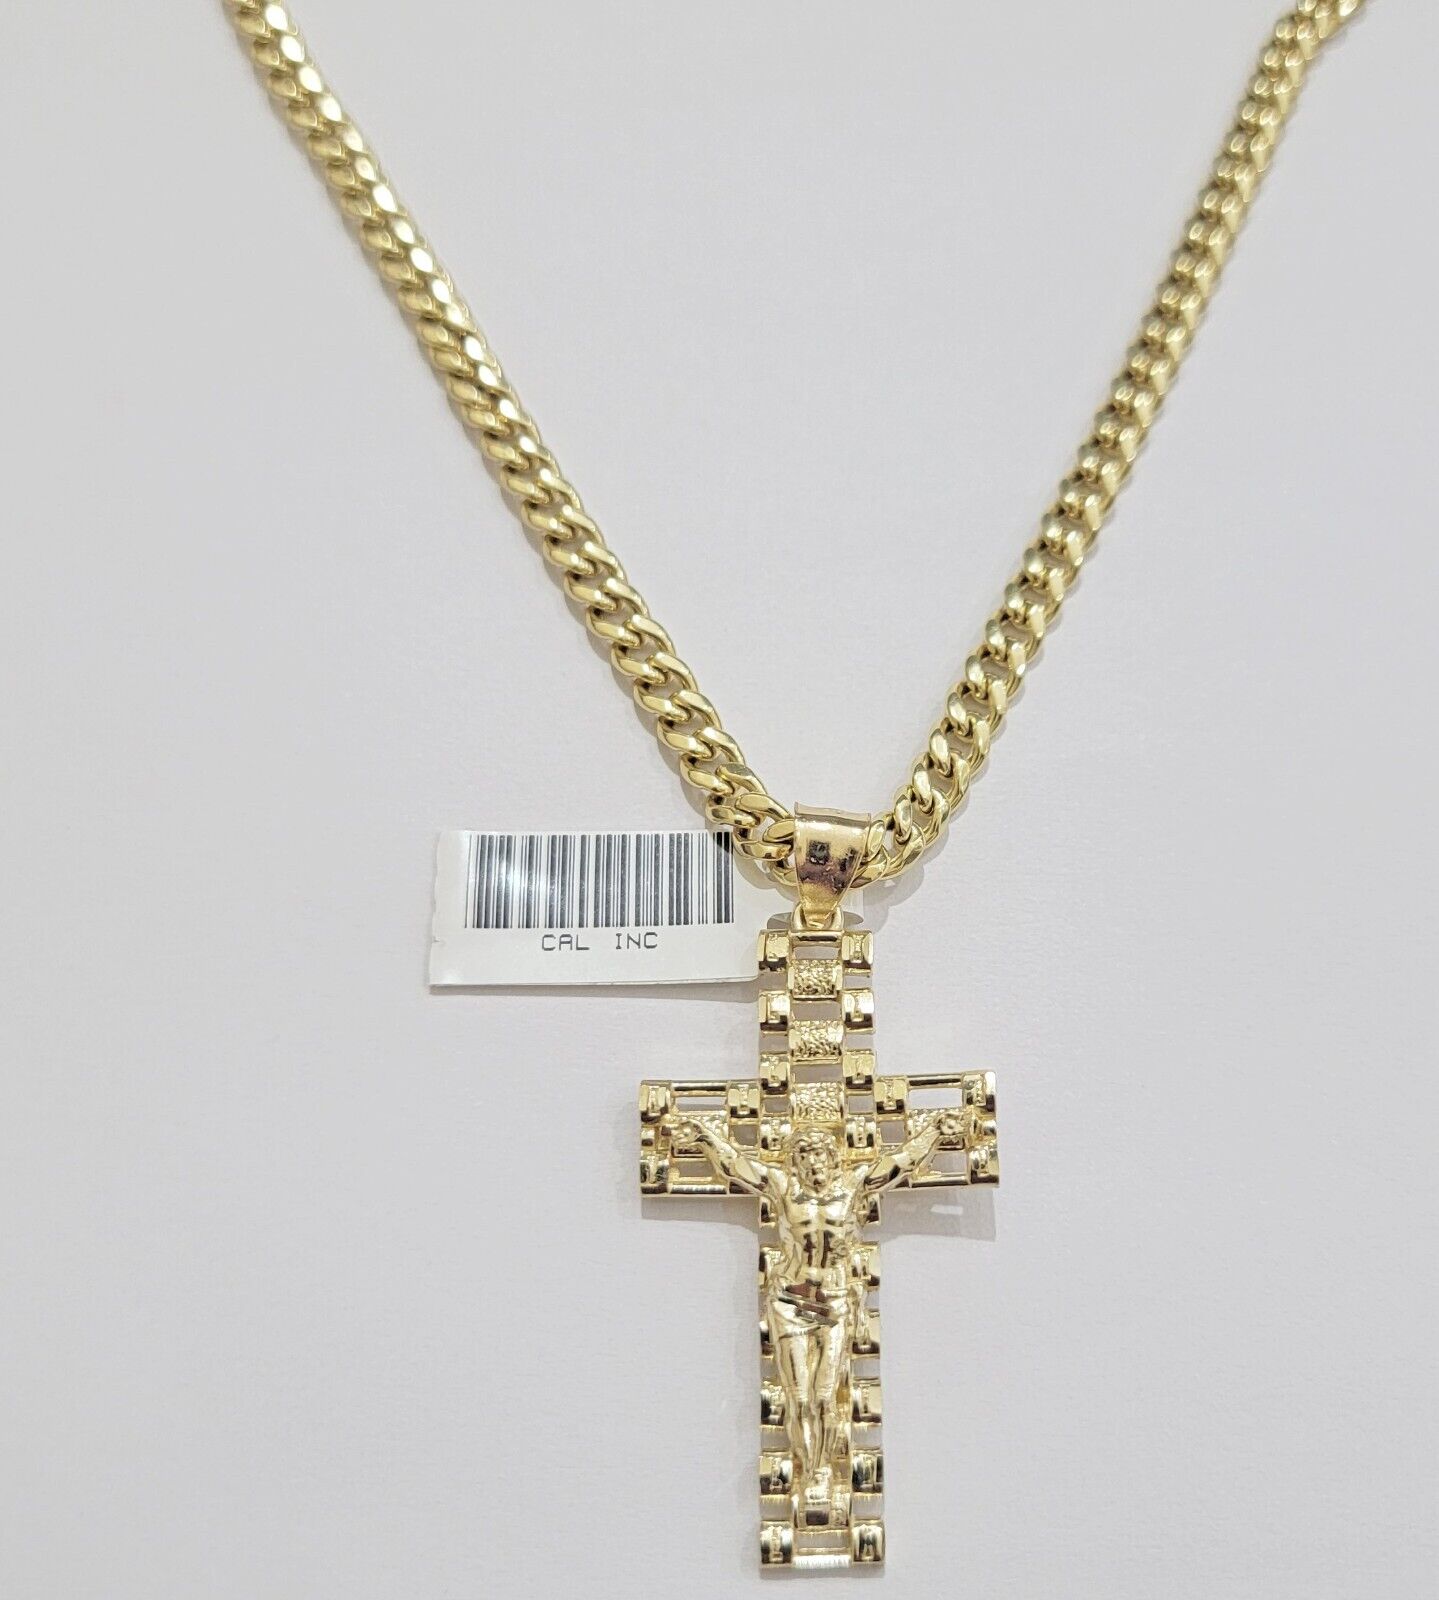 REAL 10k Yellow Gold Chain Cross Pendant Set Miami Cuban link Necklace 5mm 18-28